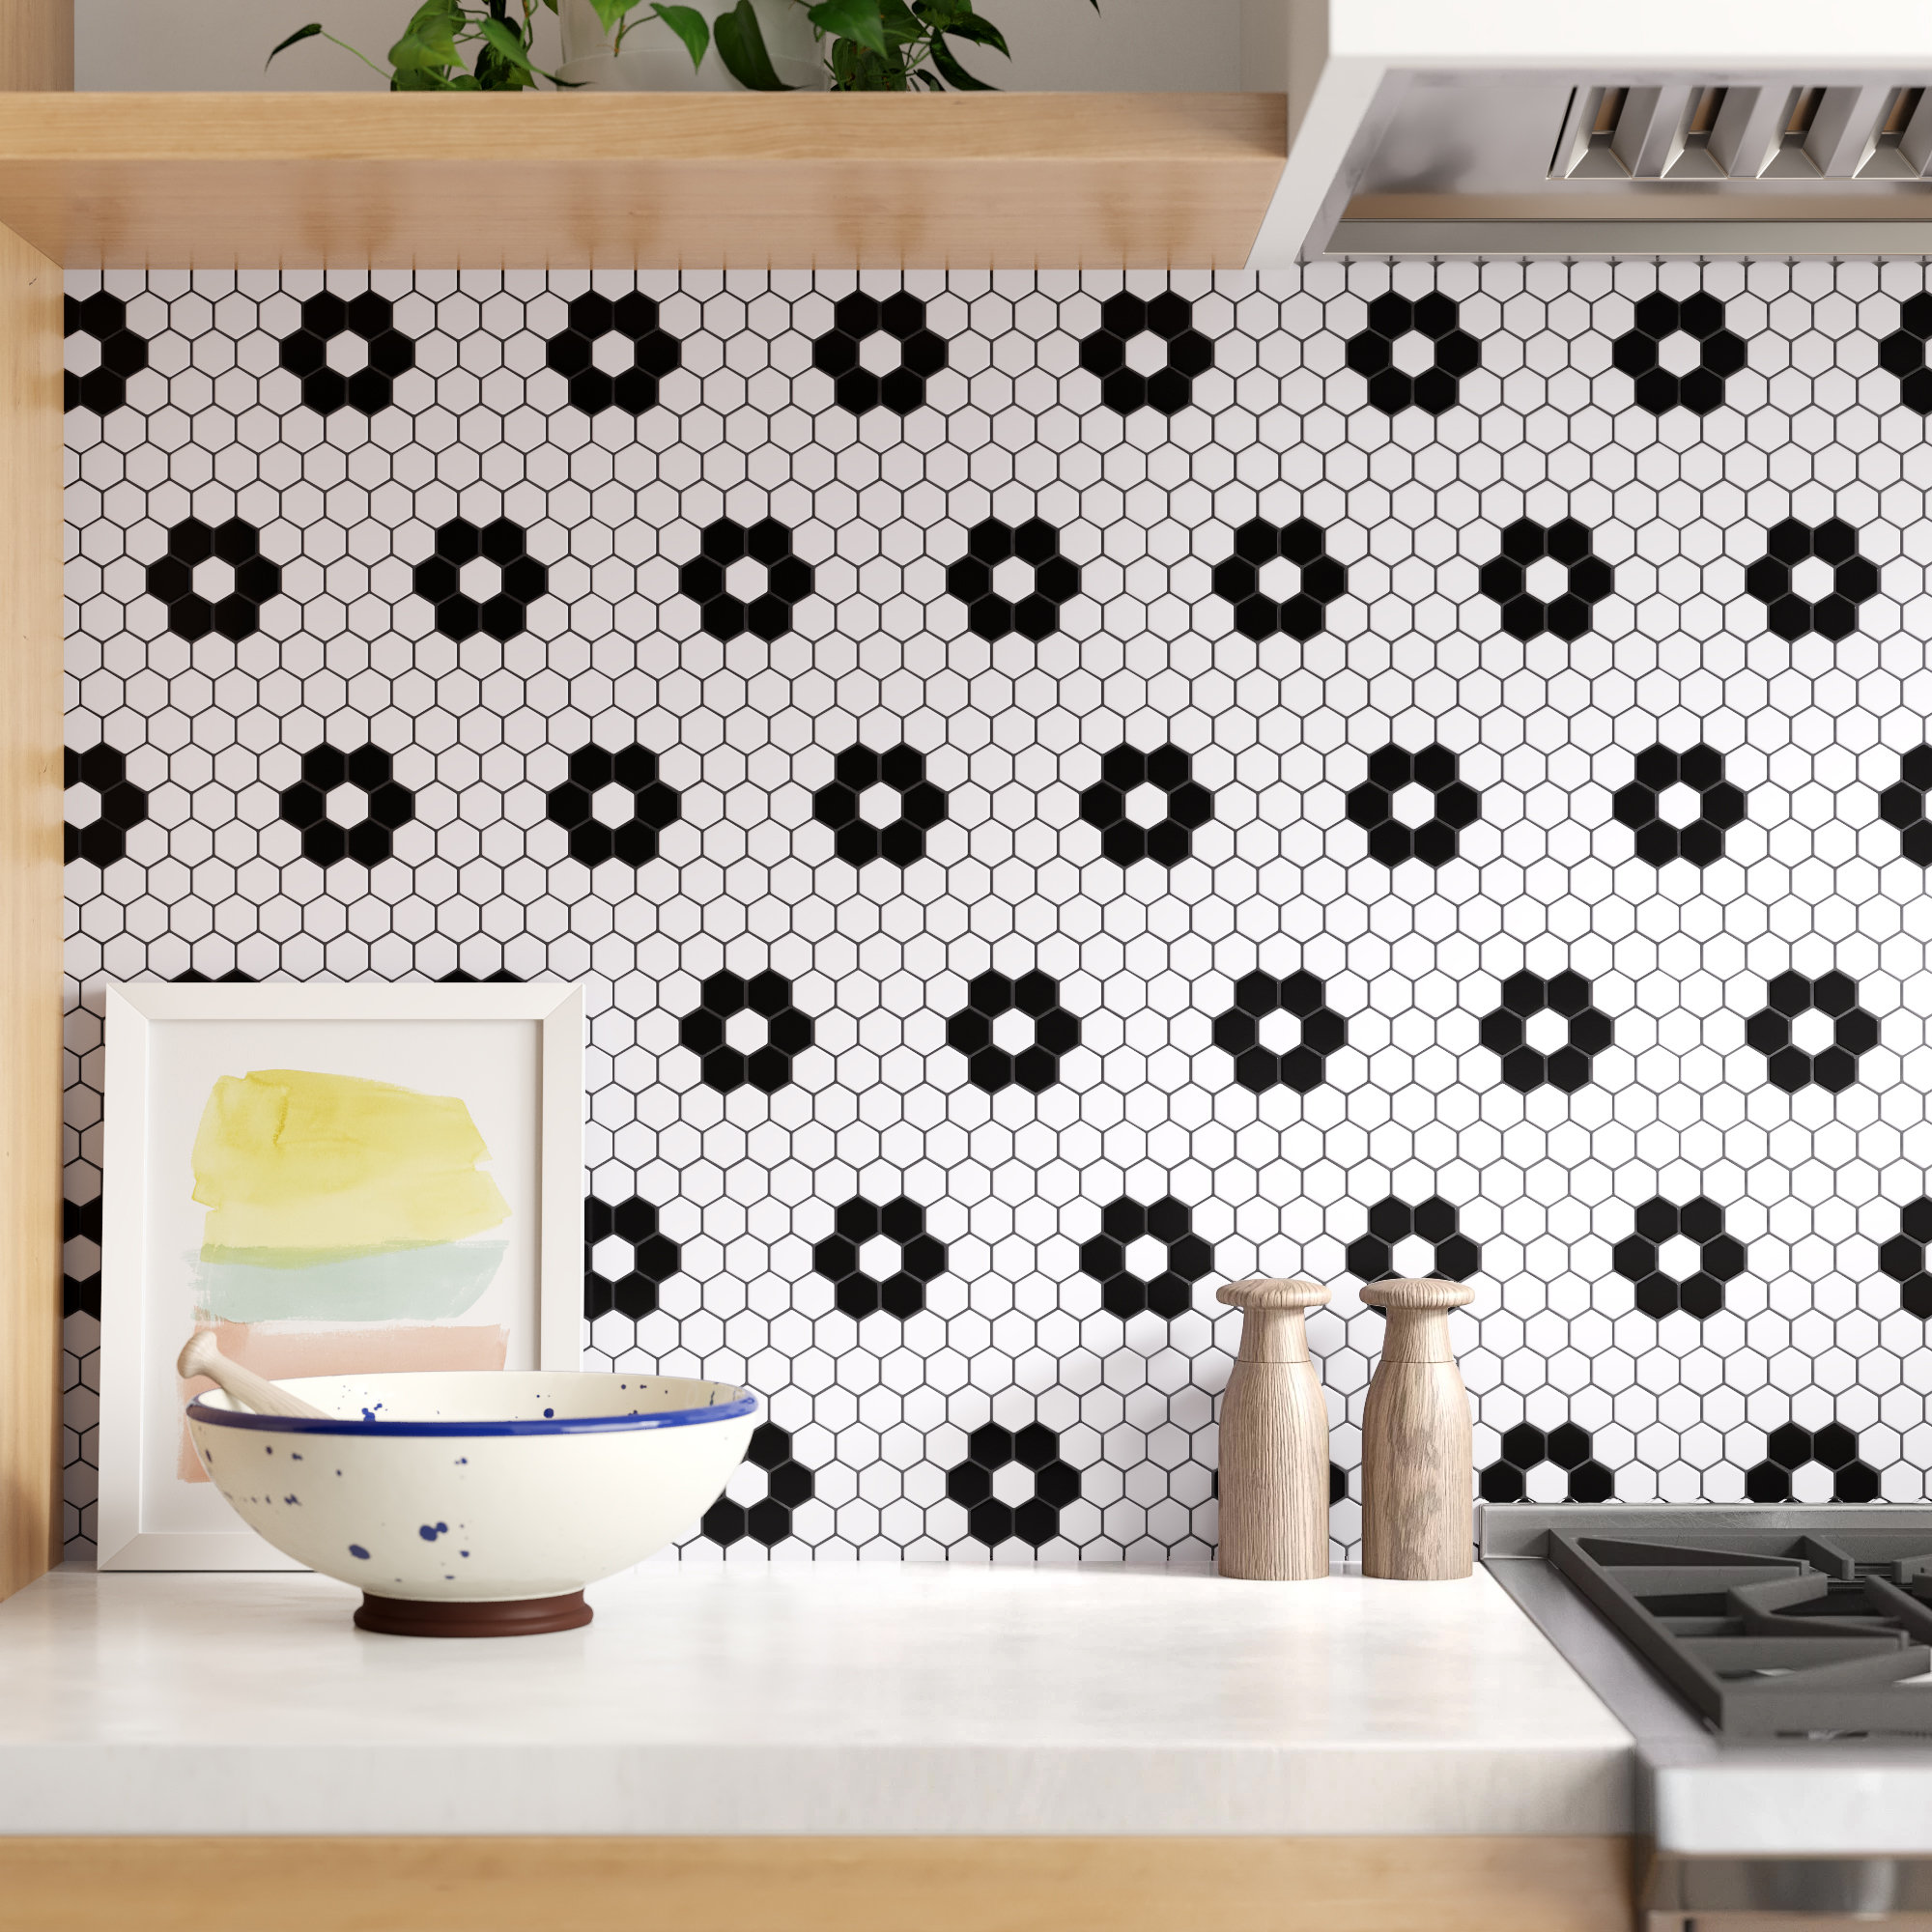 AlwaysH Tile Stickers for Bathroom and Kitchen, 30 Pieces Tile